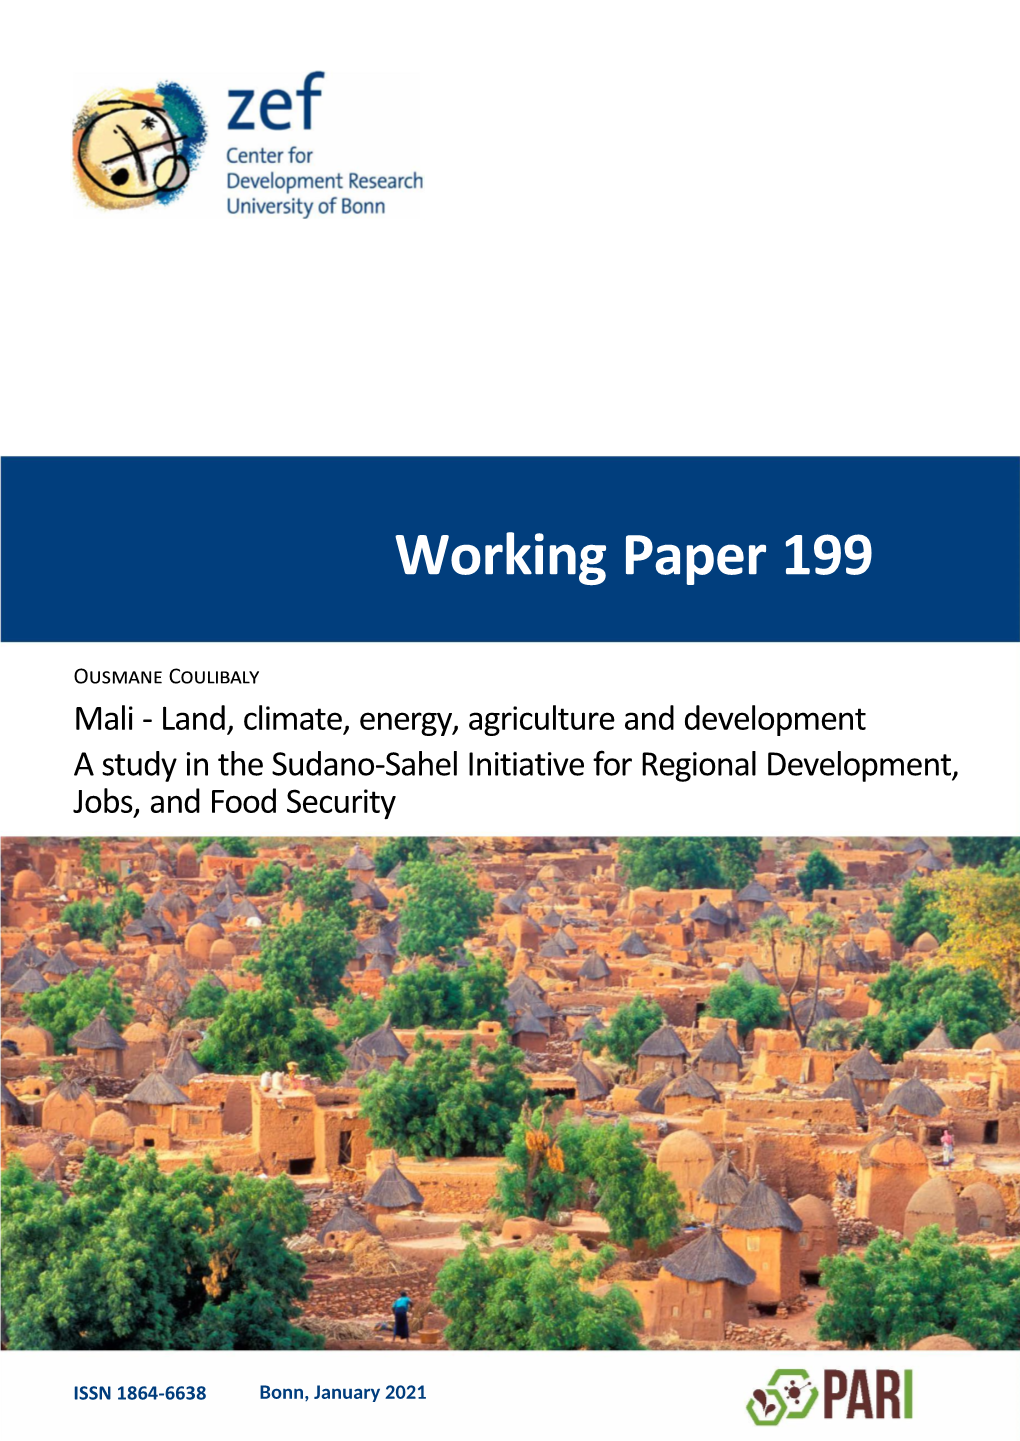 Mali - Land, Climate, Energy, Agriculture and Development a Study in the Sudano-Sahel Initiative for Regional Development, Jobs, and Food Security